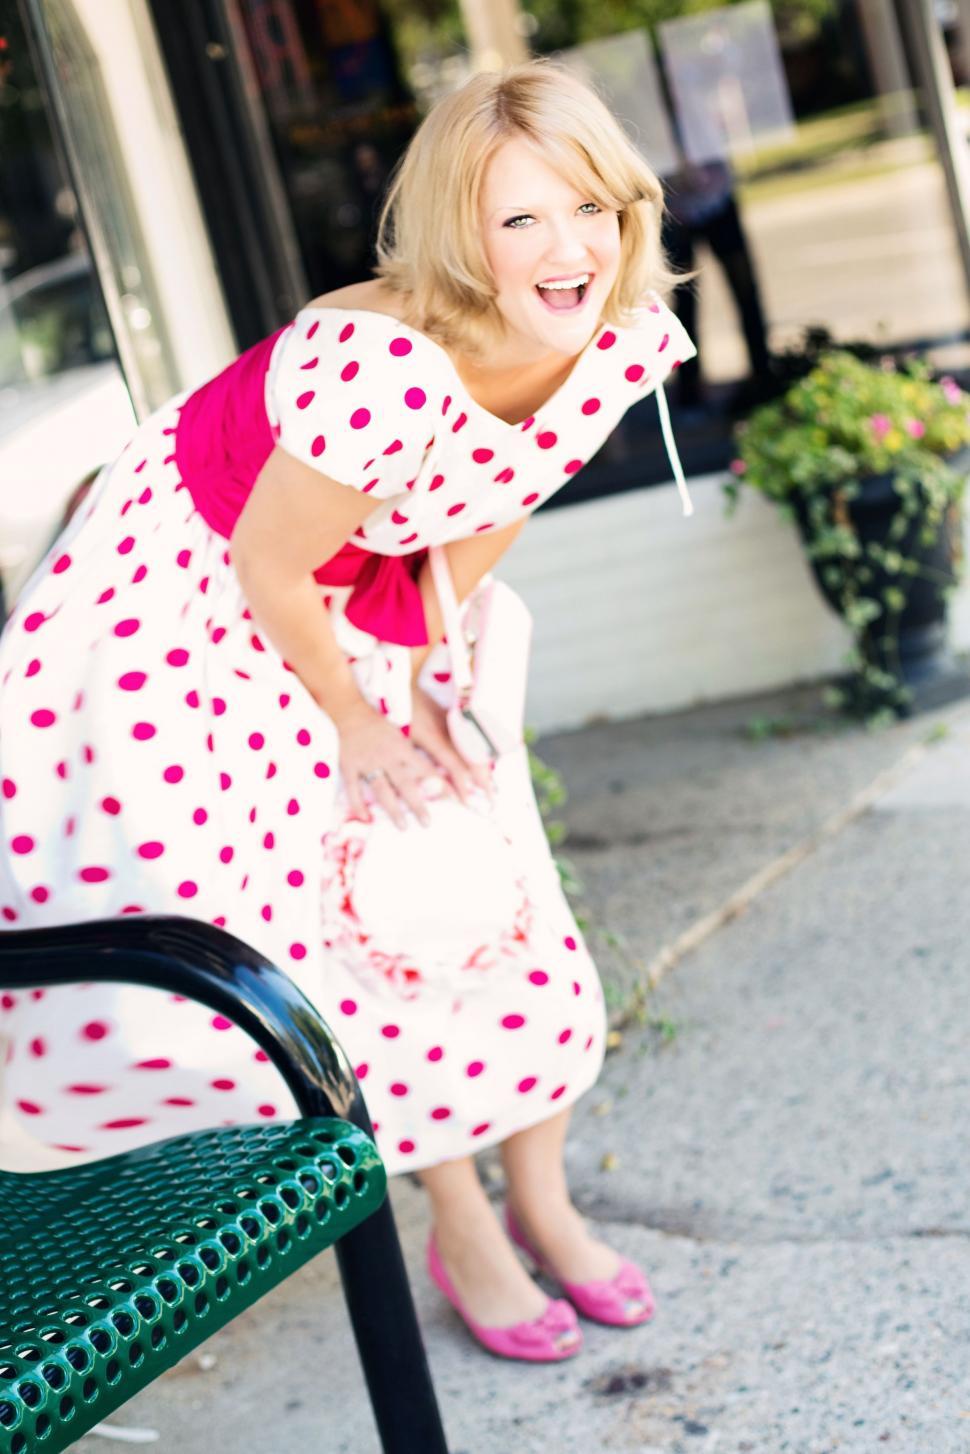 Free Image of Blonde Woman Laughing on the street - looking at camera 